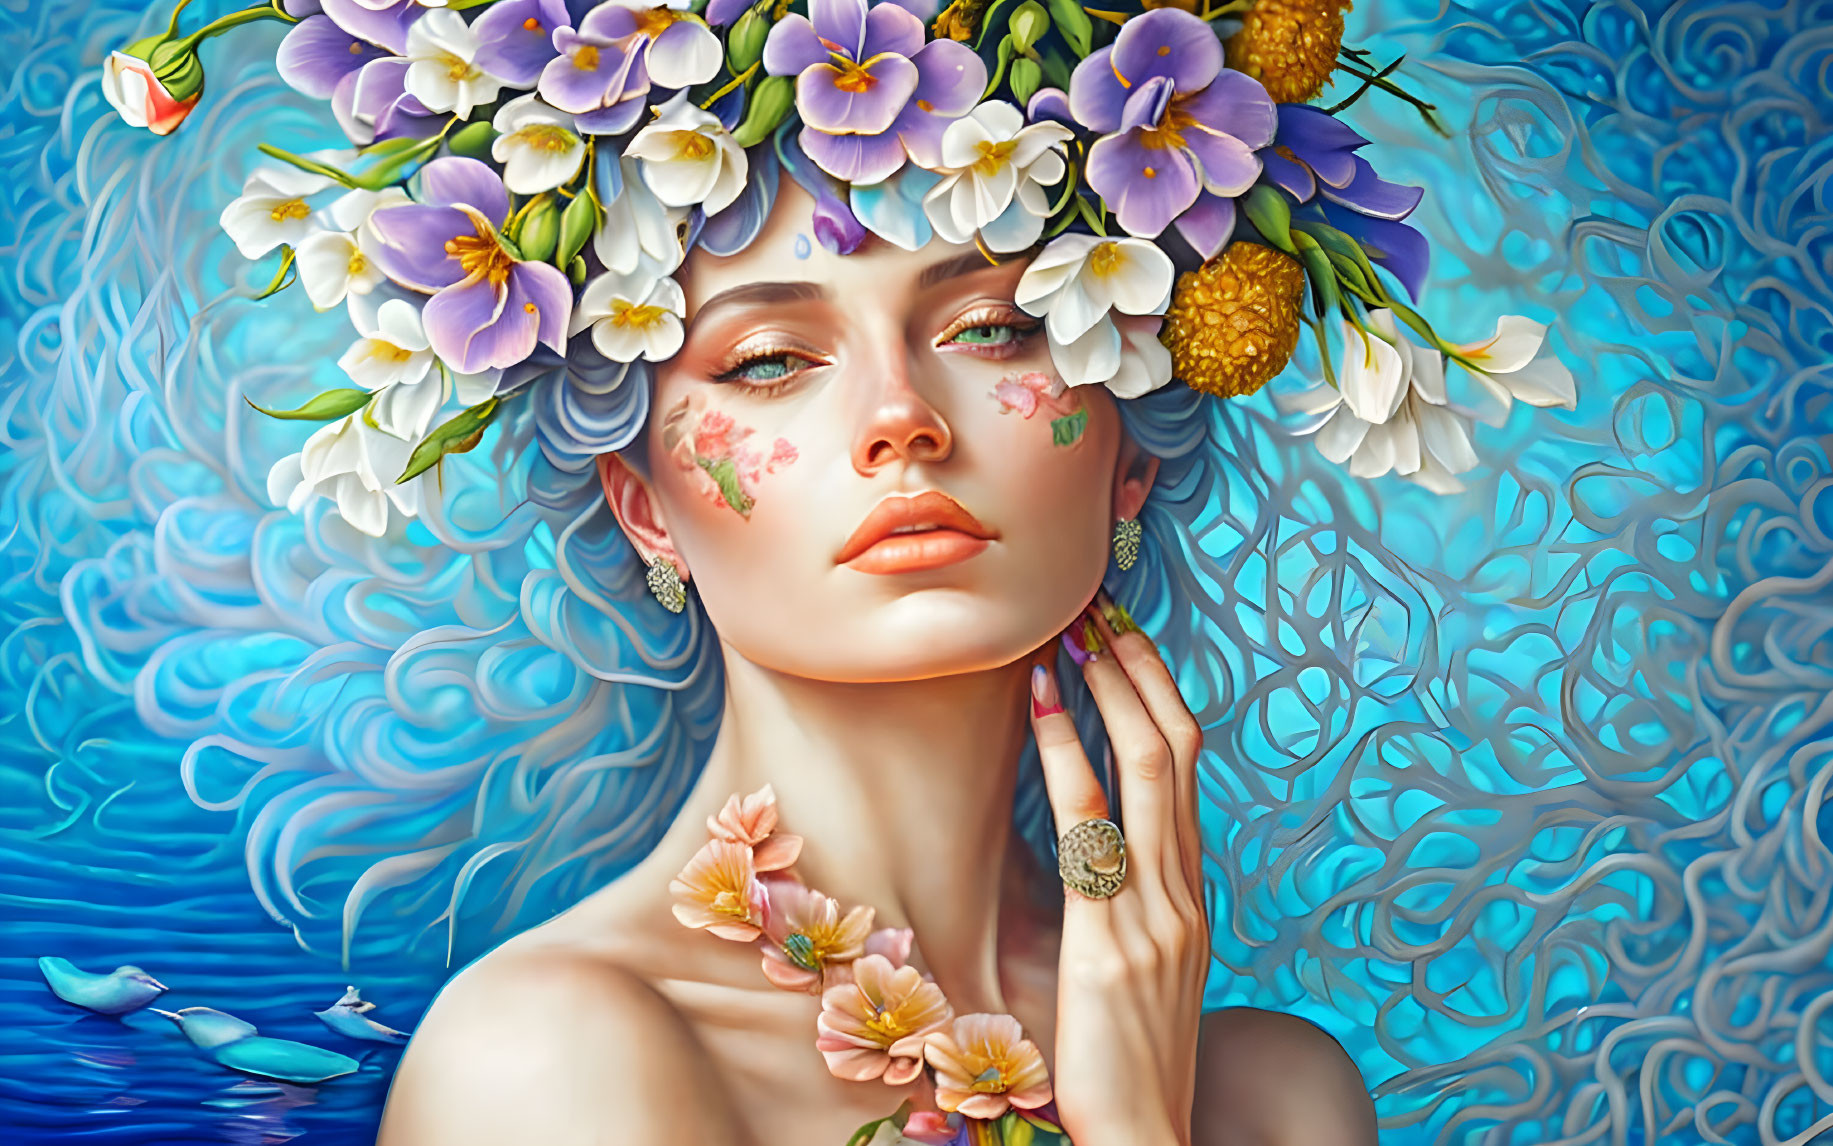 Surreal portrait of woman with flower crown and tattoos on swirling blue background